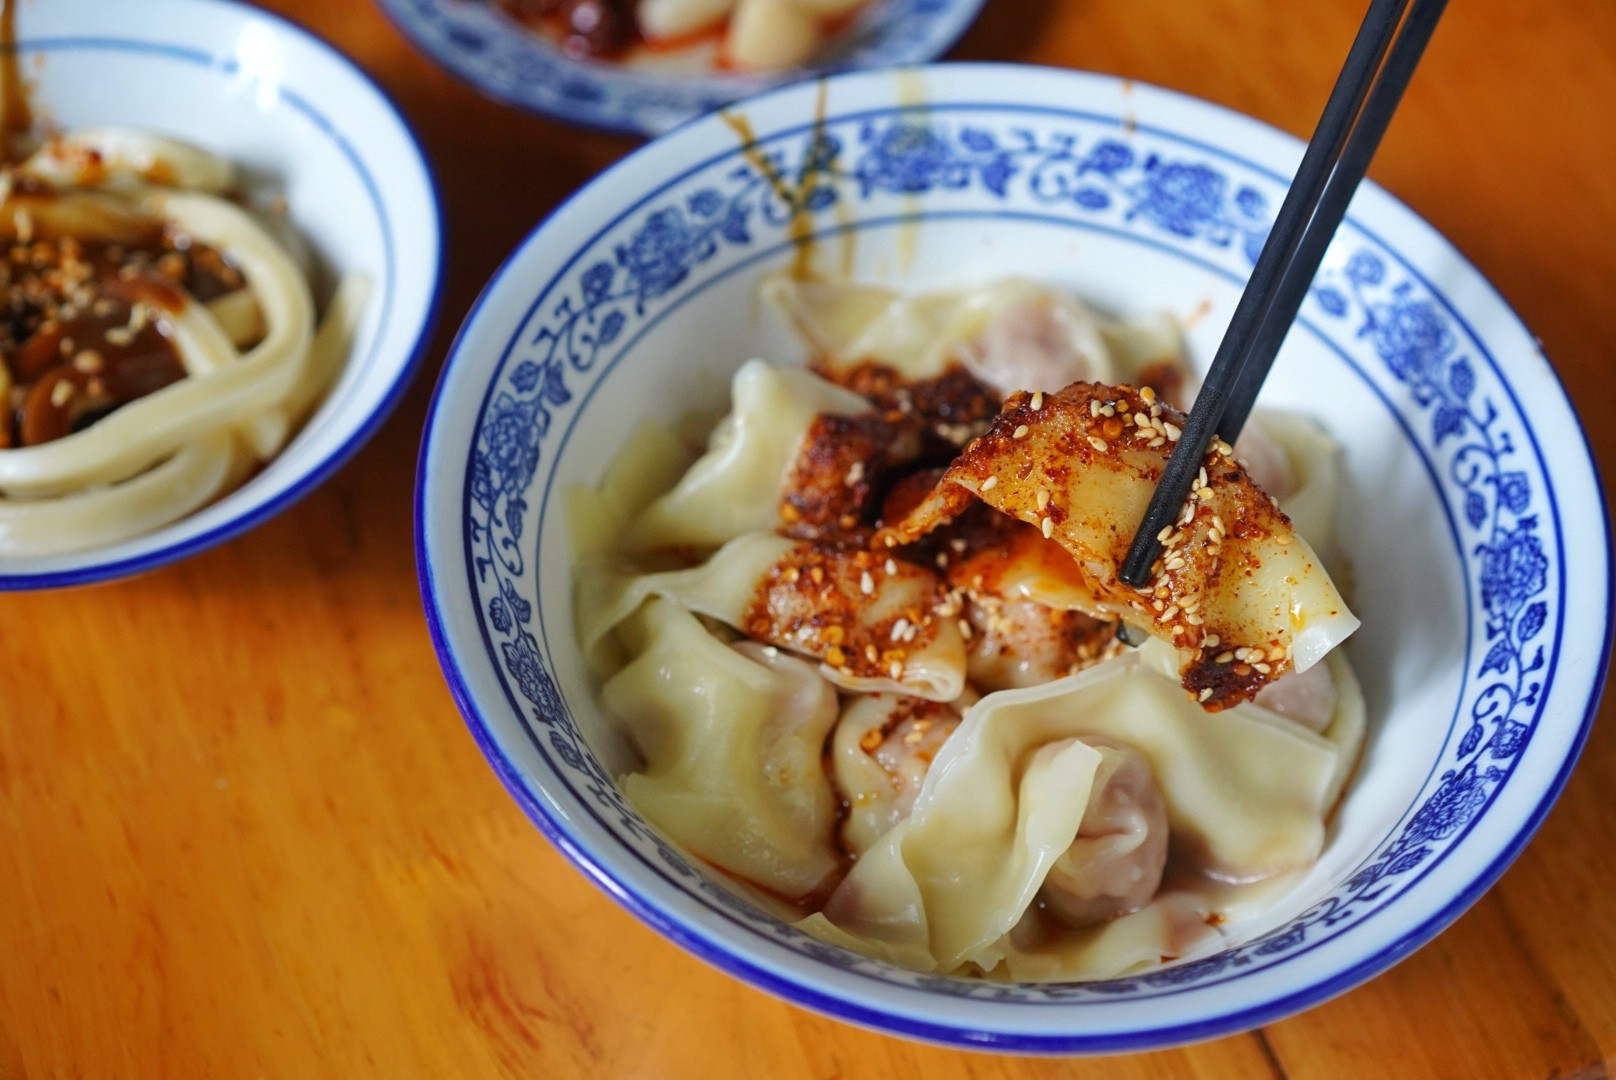 How to Eat Your Way Through Chengdu